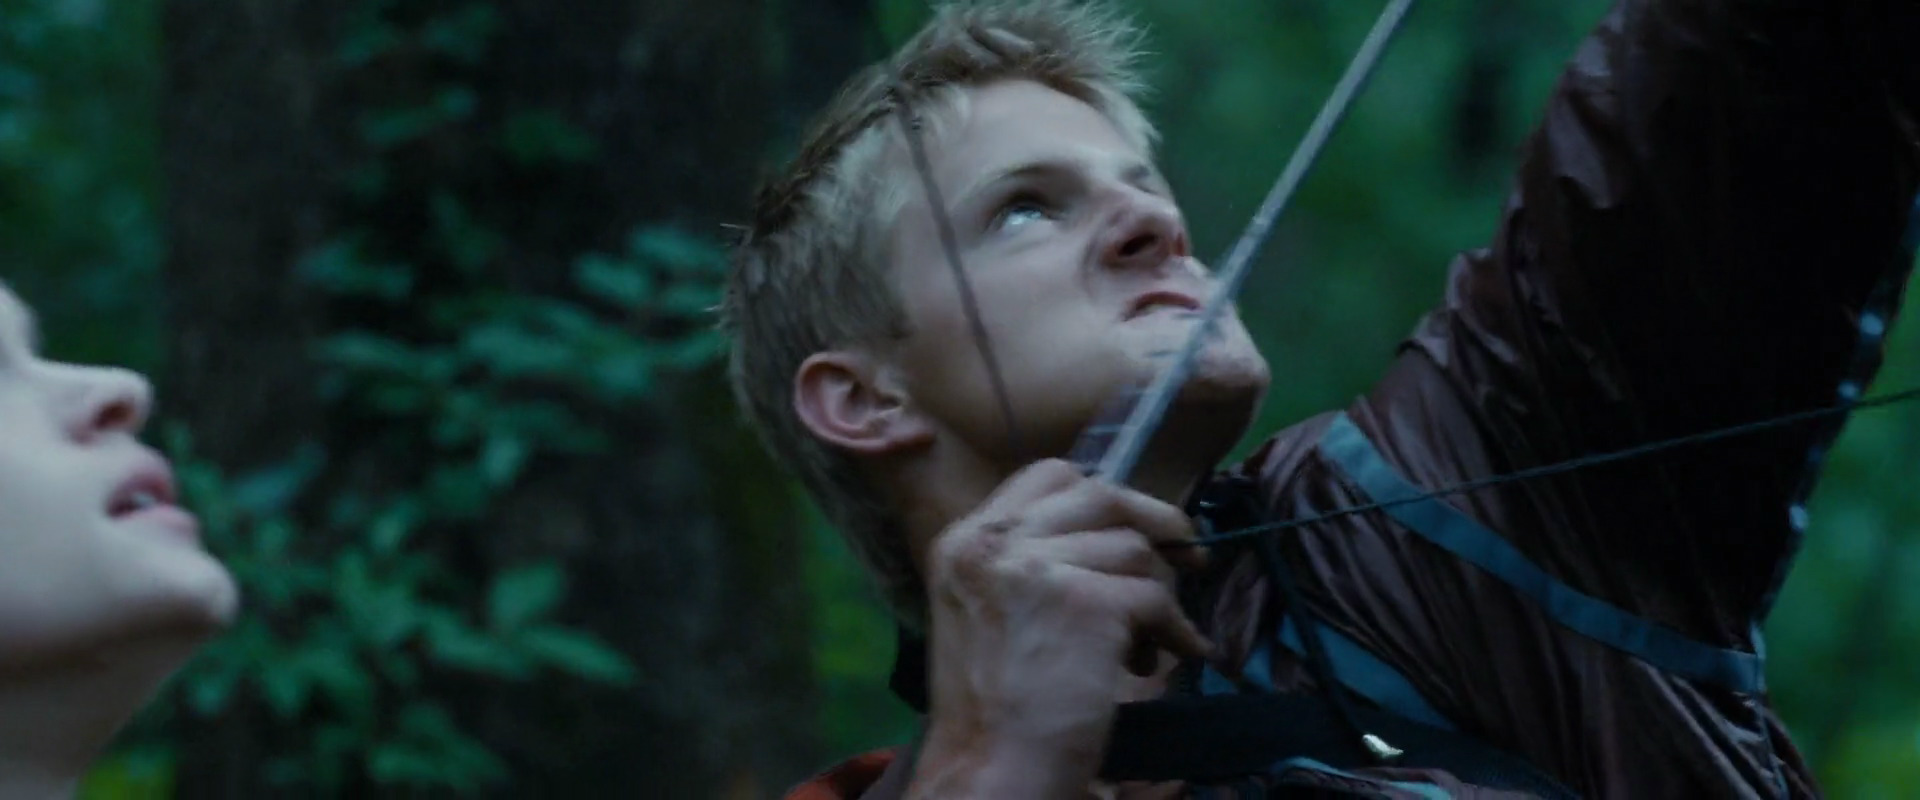 Cato - The Hunger Games Wiki. edit. download. 